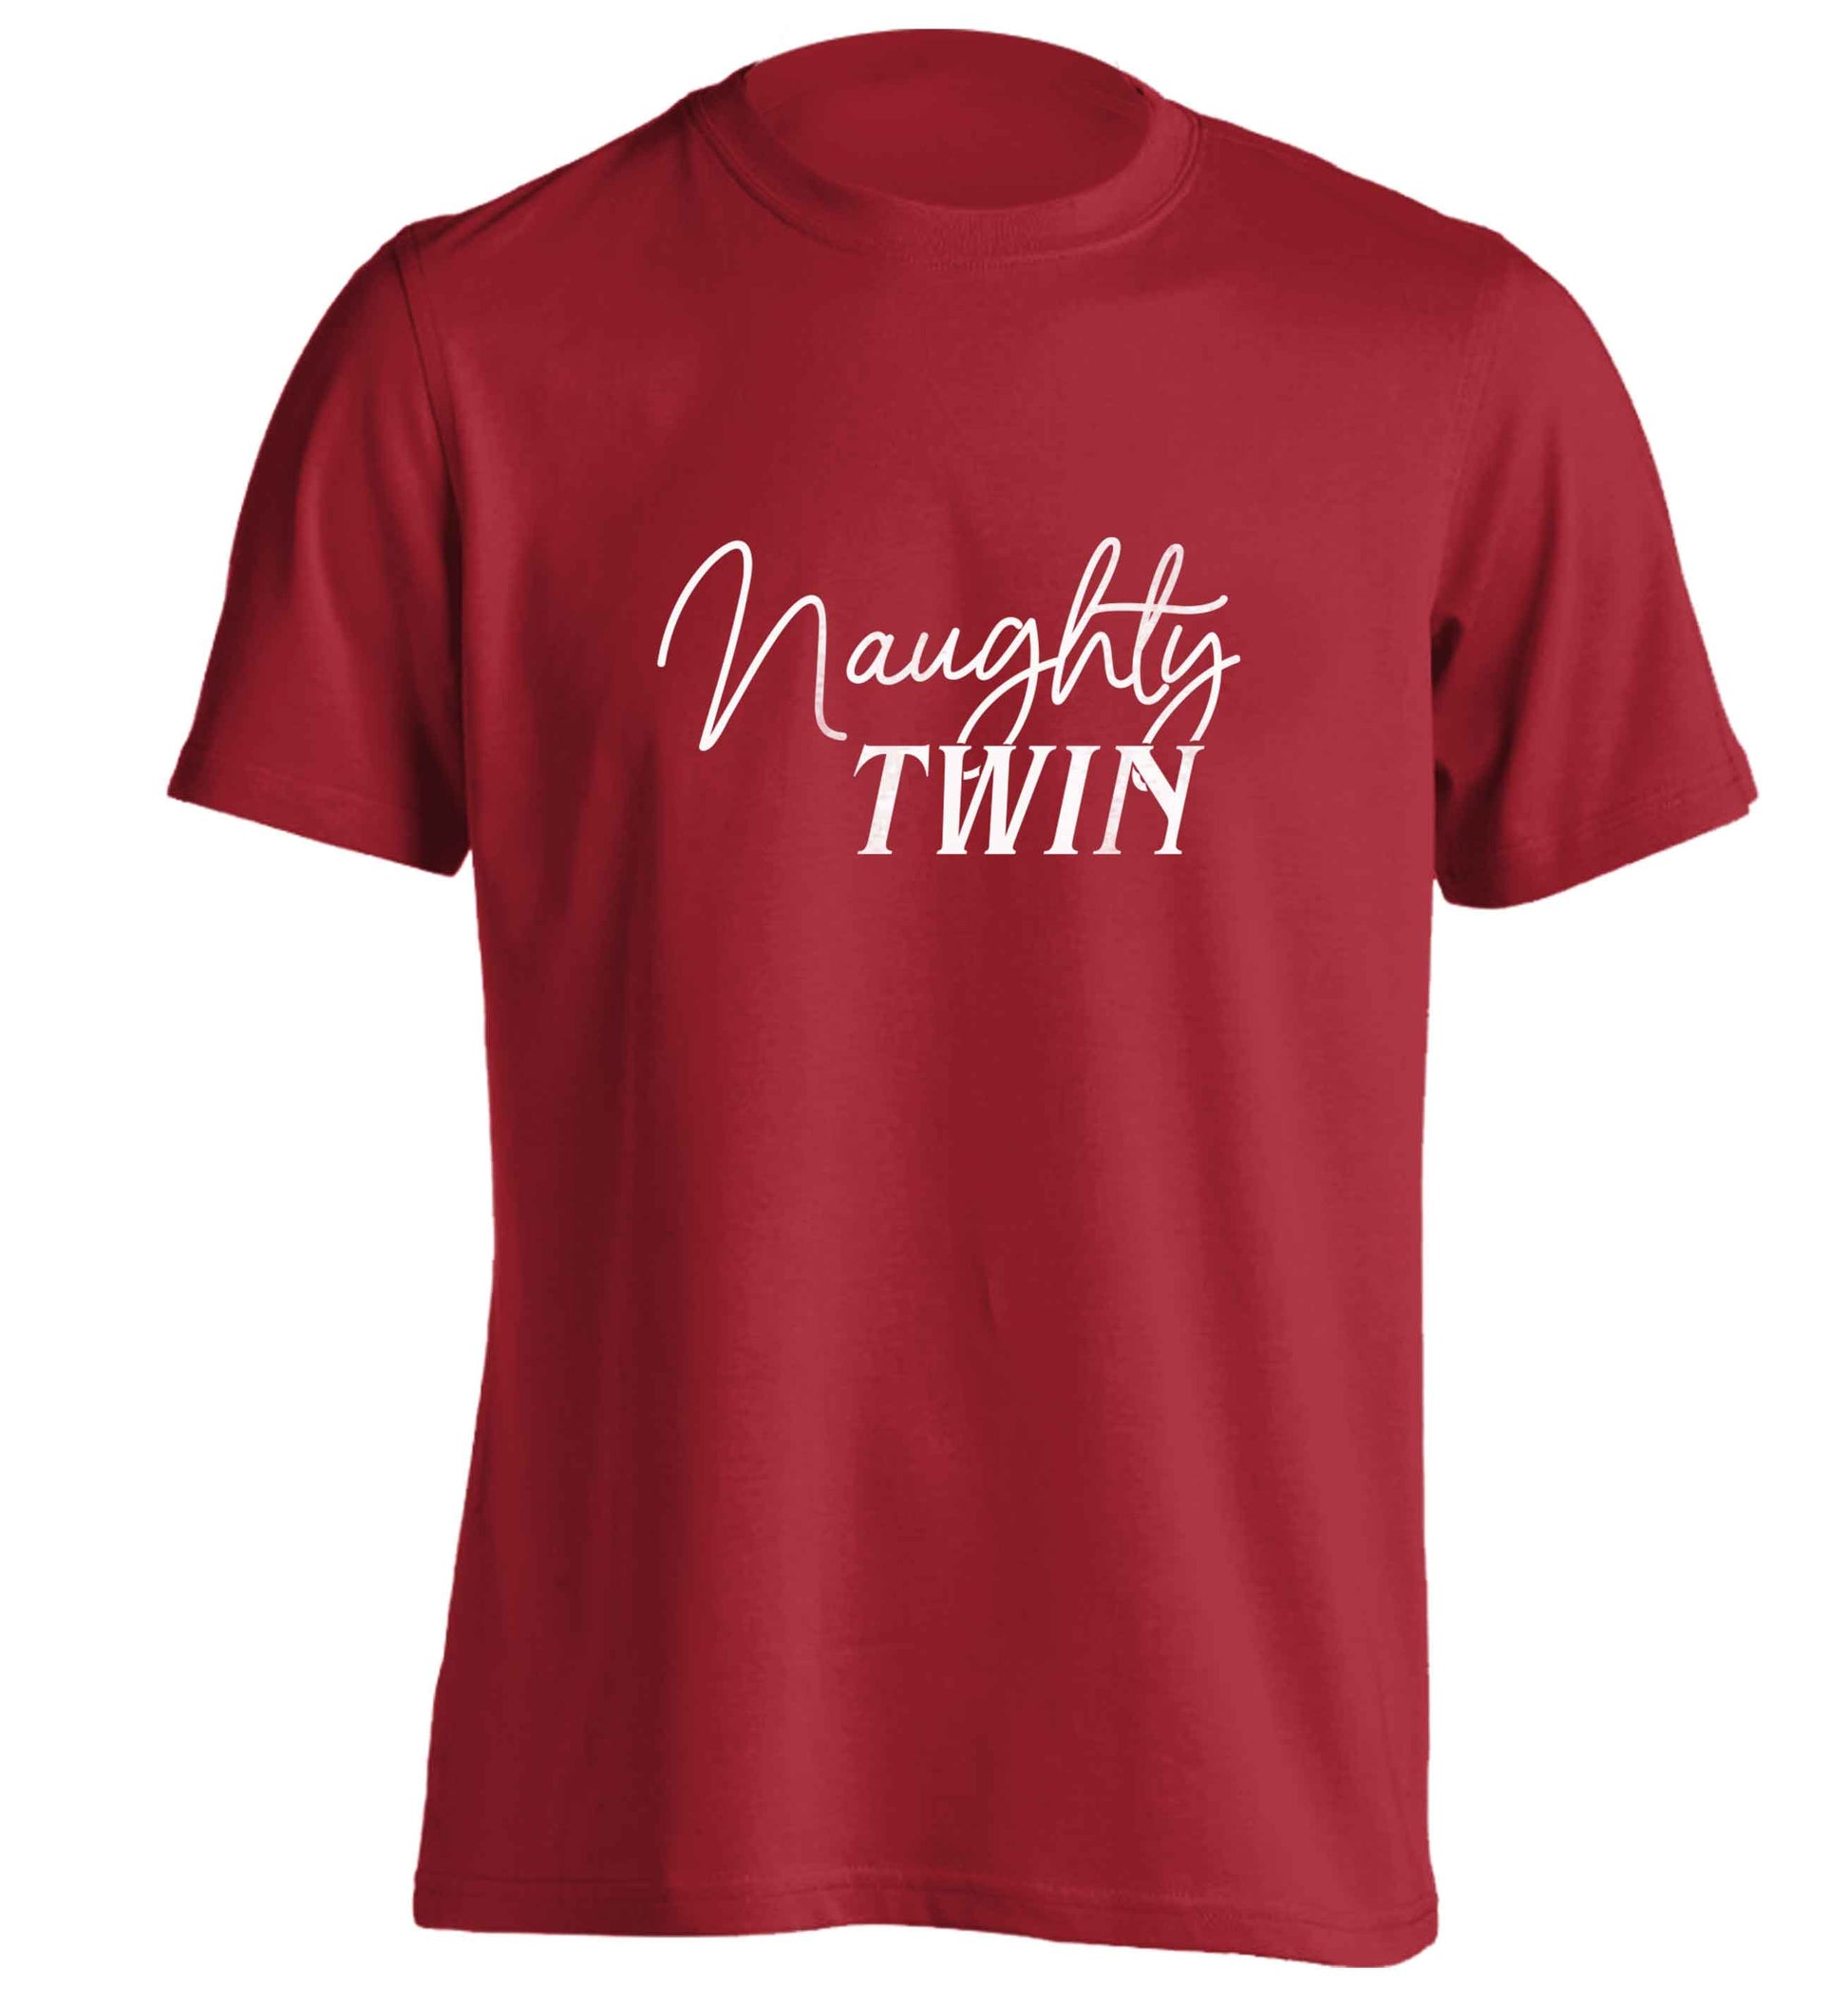 Naughty twin adults unisex red Tshirt 2XL